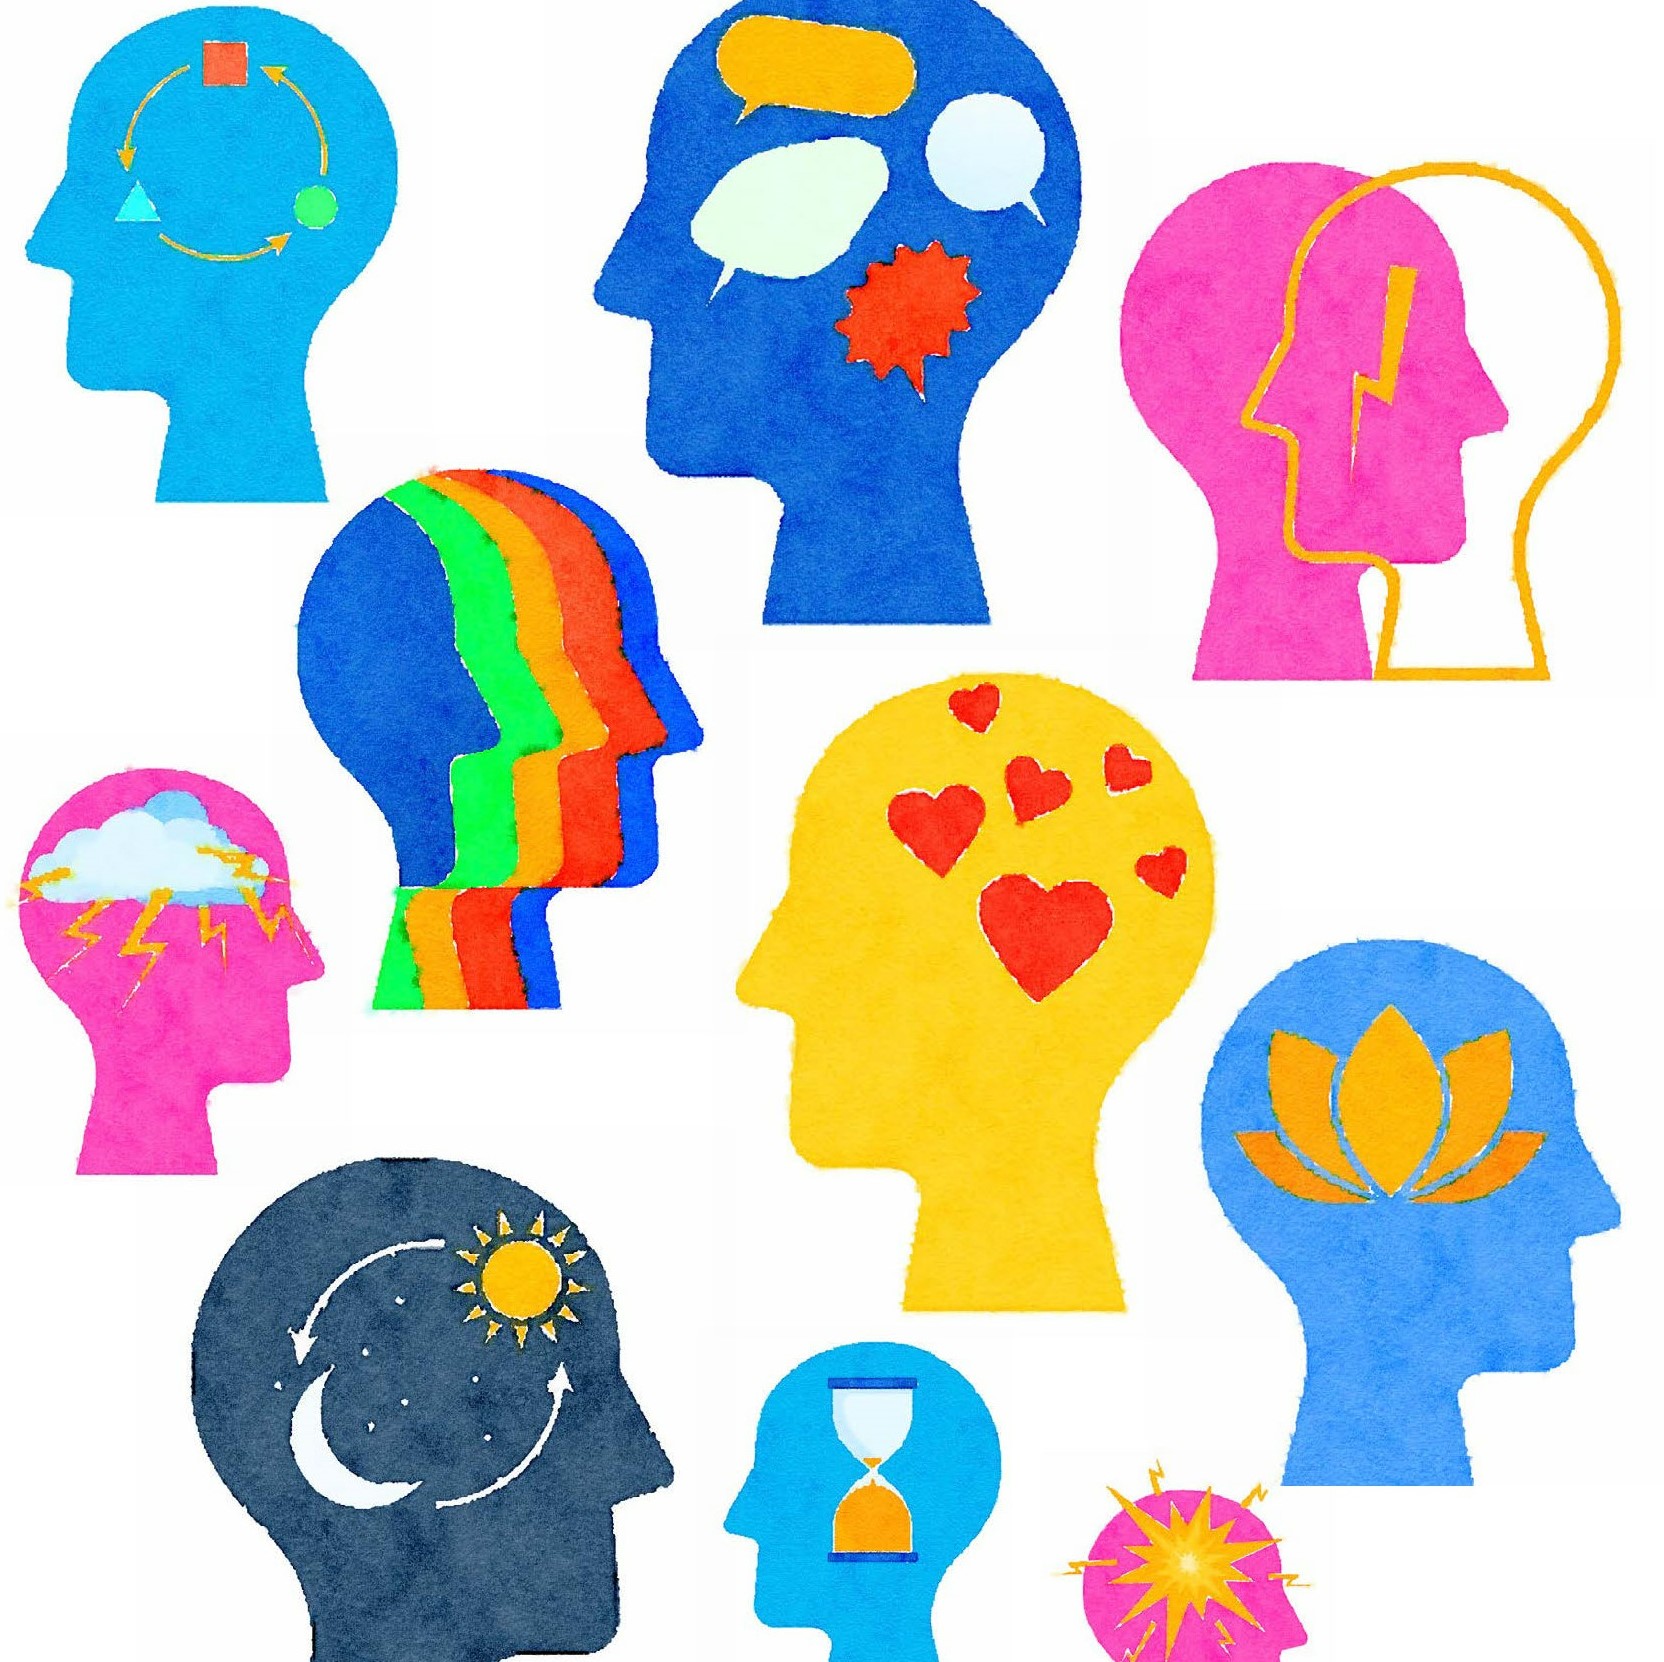 Multiple head illustrations depicting various types of thoughts, concerns, and states of mind